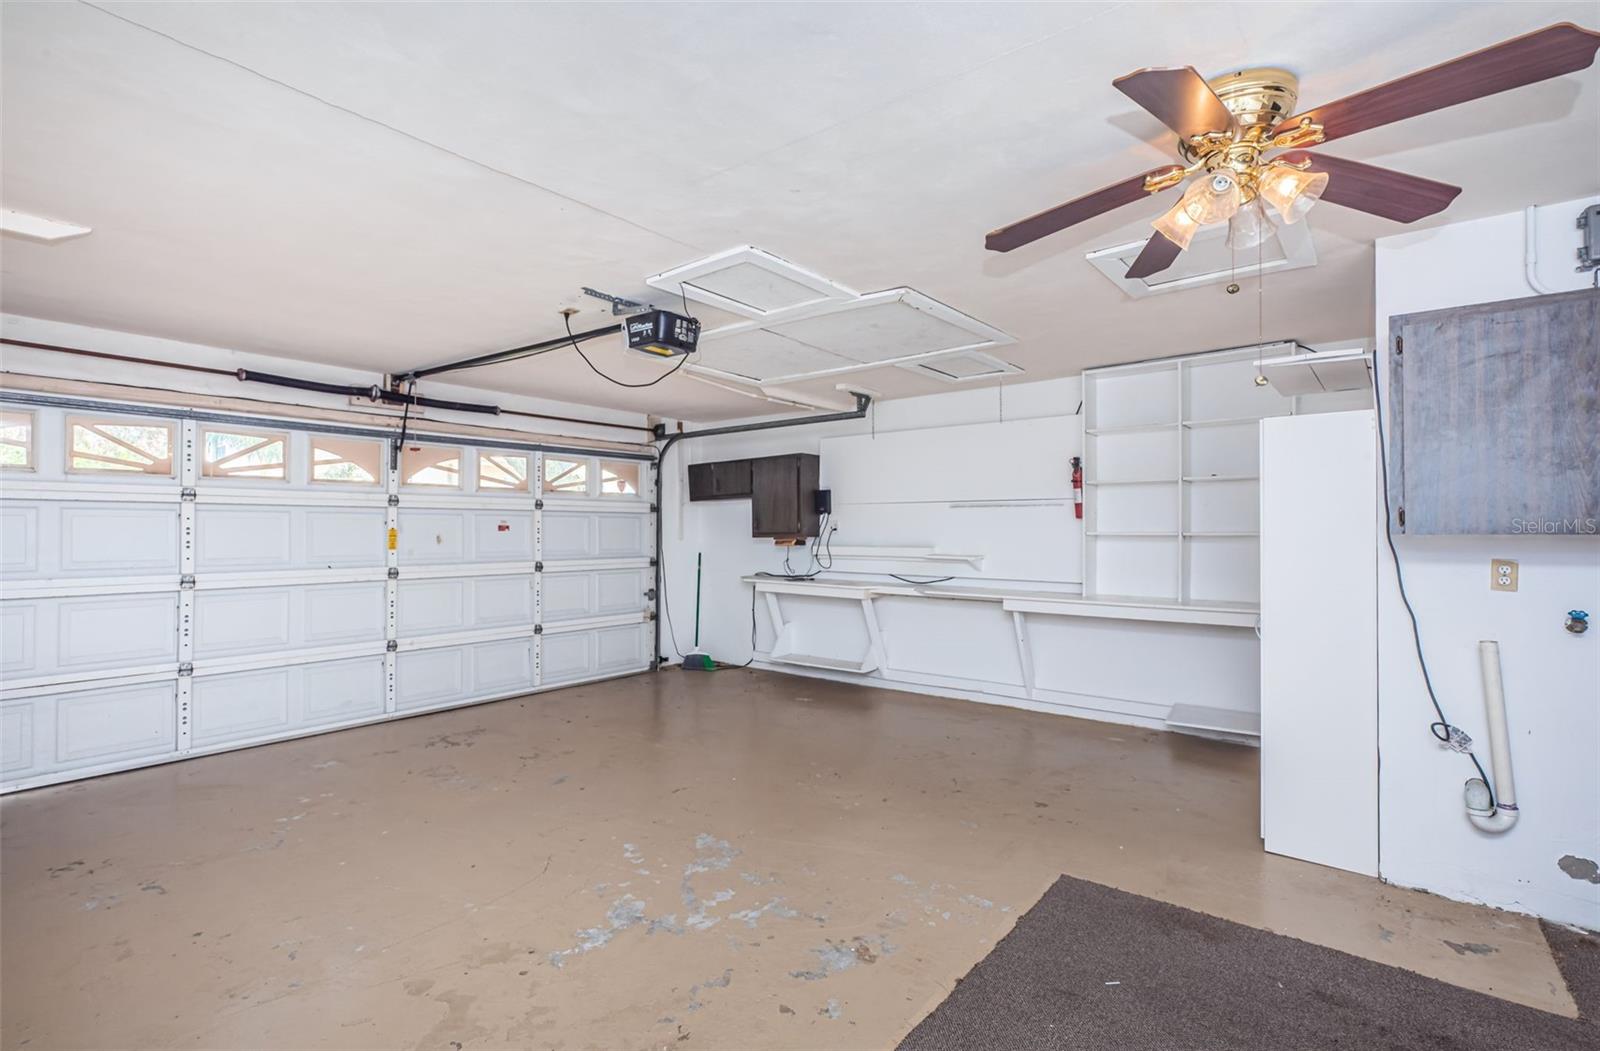 The garage is not just a place to store vehicles; it's a functional extension of the home, offering security and extra space for your belongings.